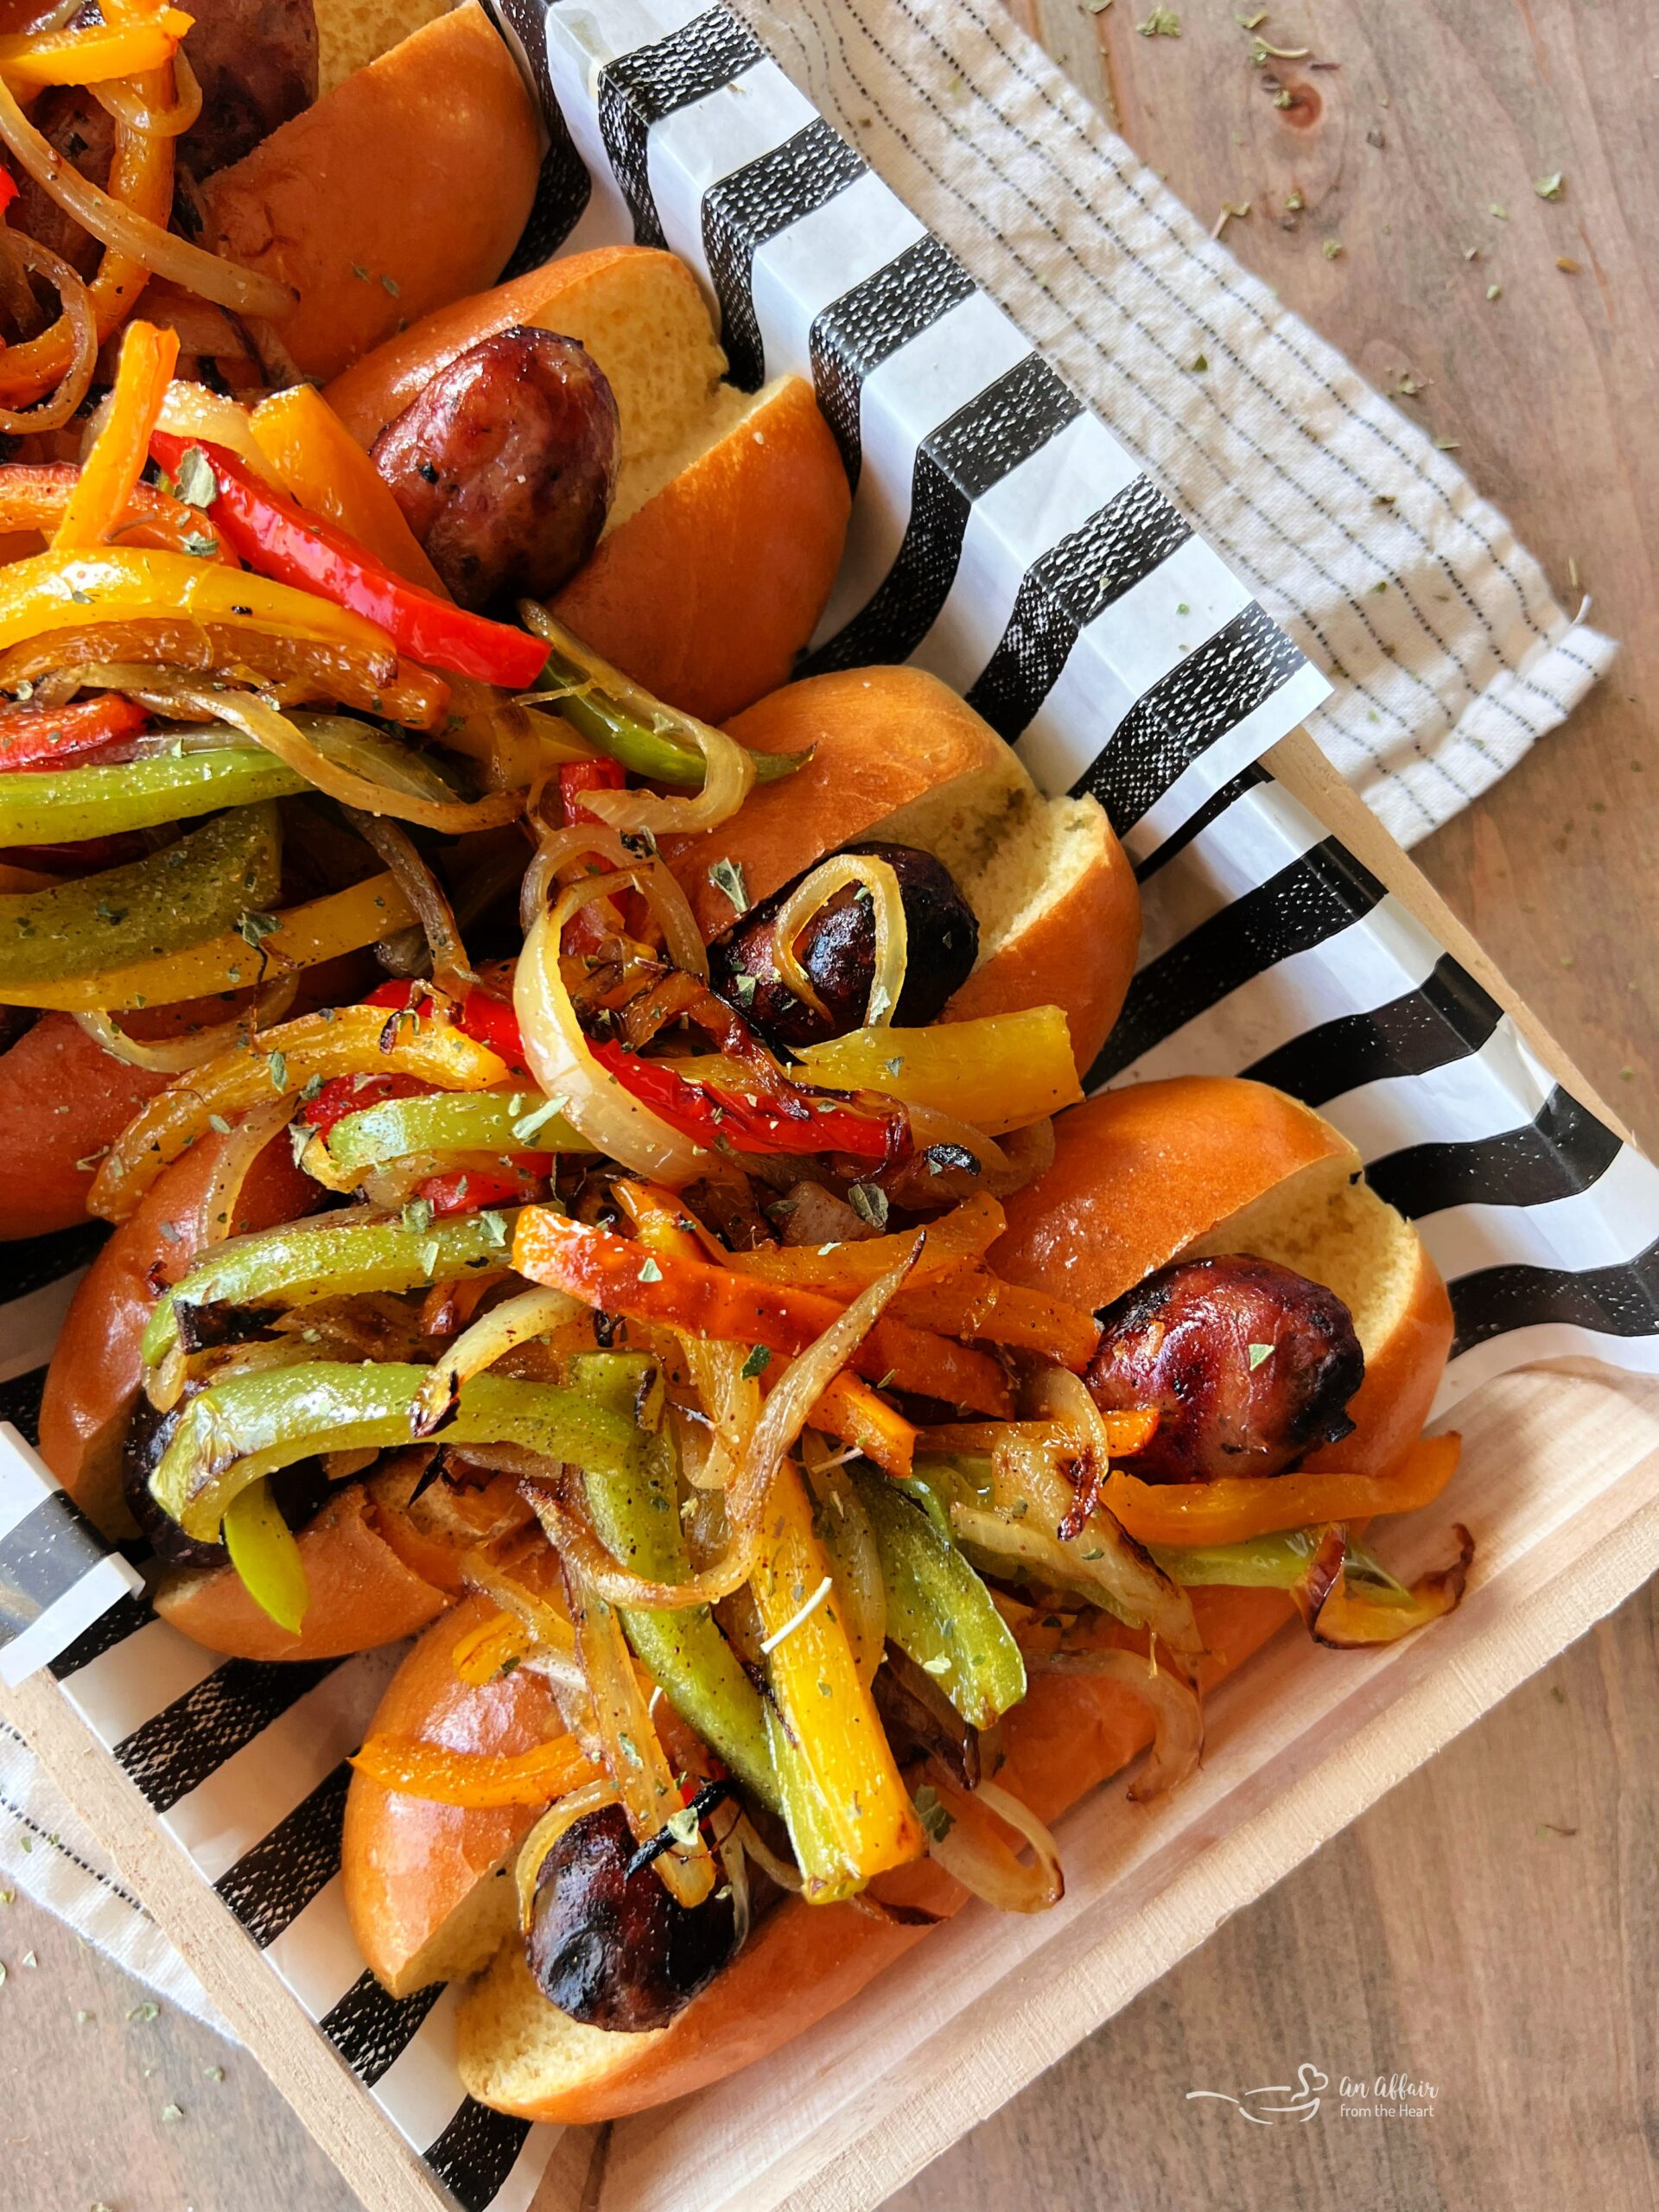 Grilled Italian Sausages with Peppers & Onions